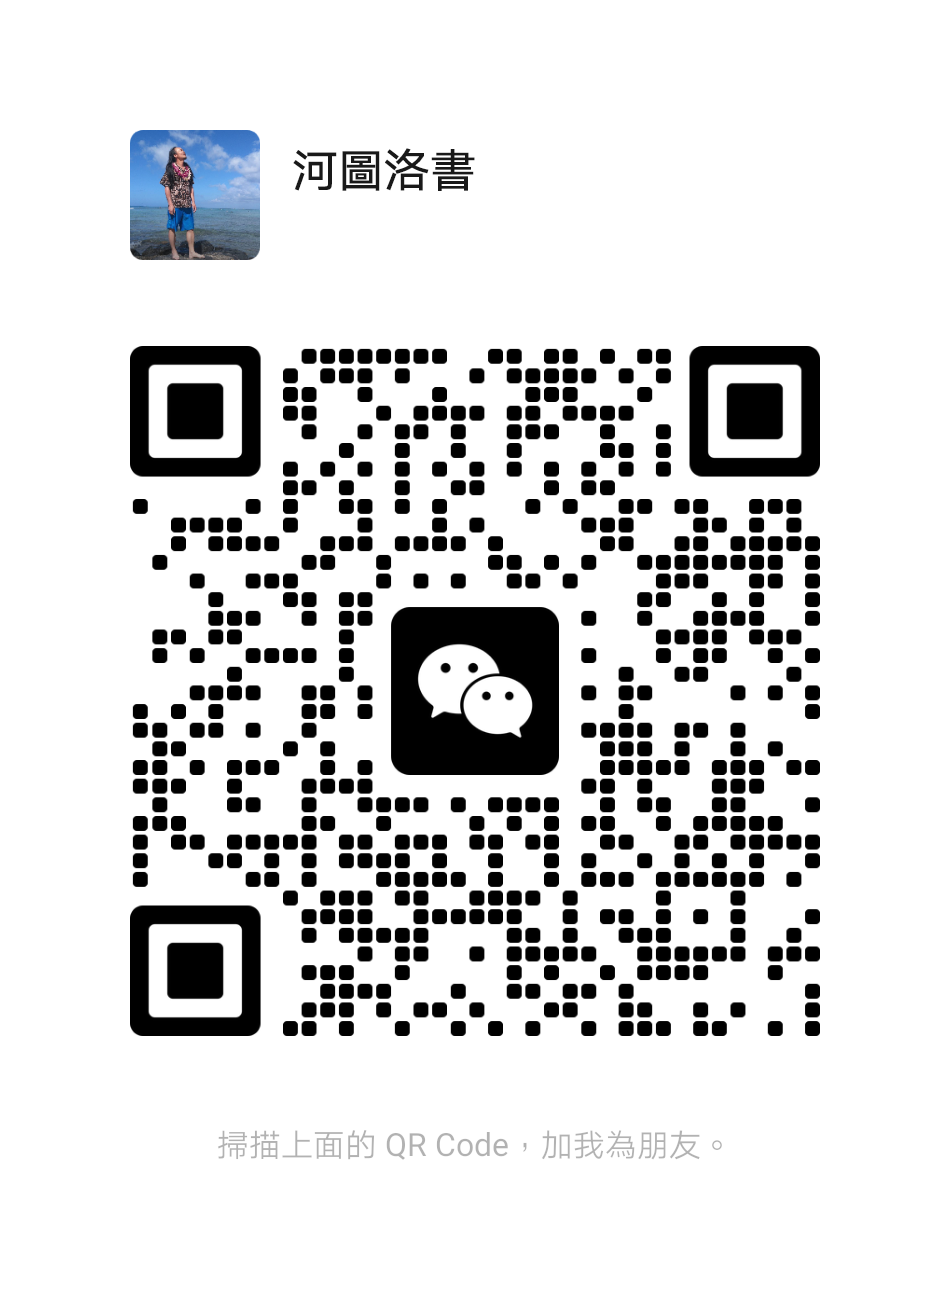 mmqrcode1676432953986.png